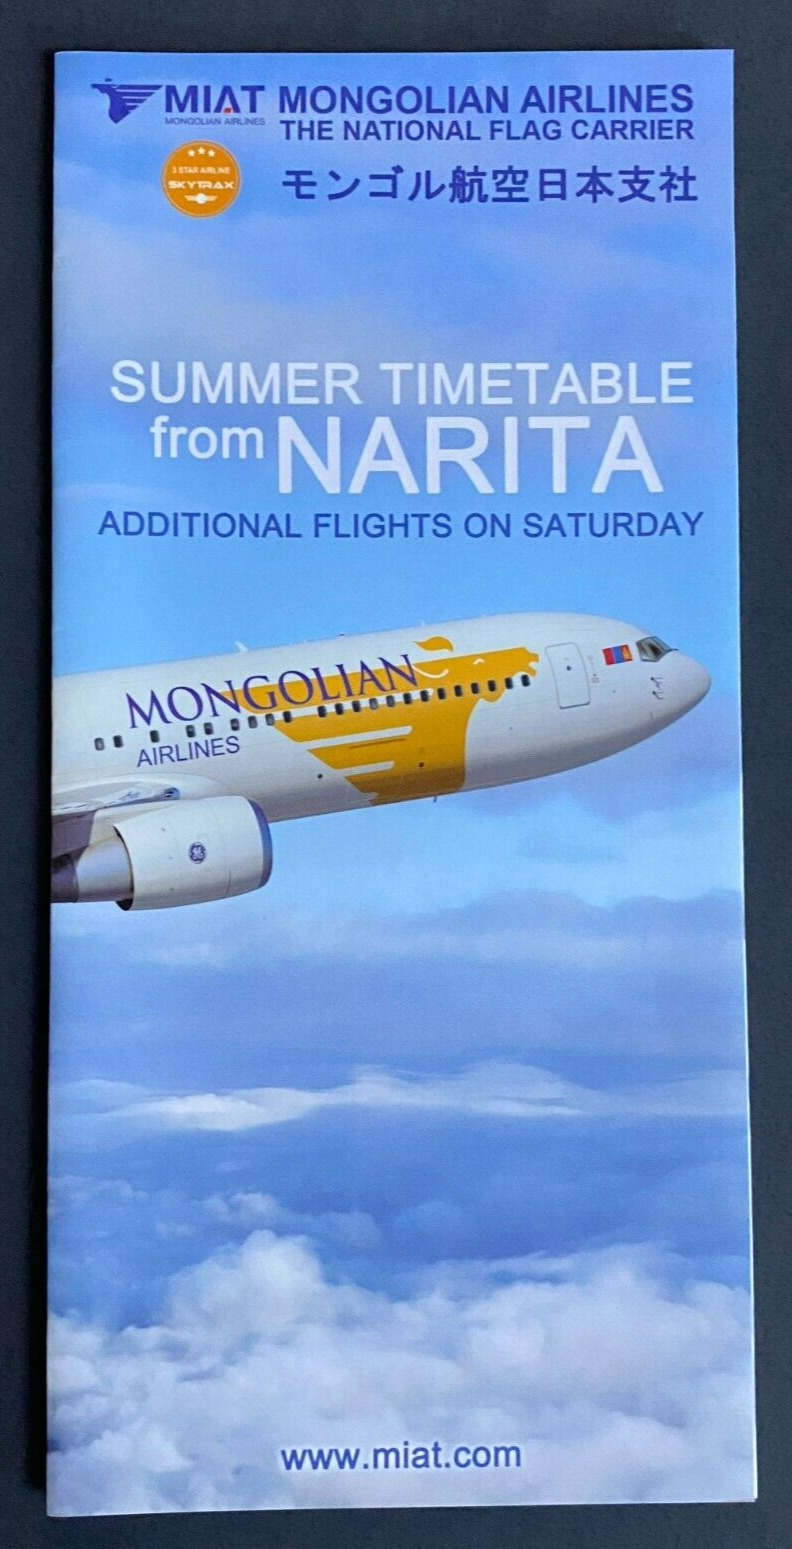 MIAT Mongolian Airlines Narita Timetable Effective March 28, 2016